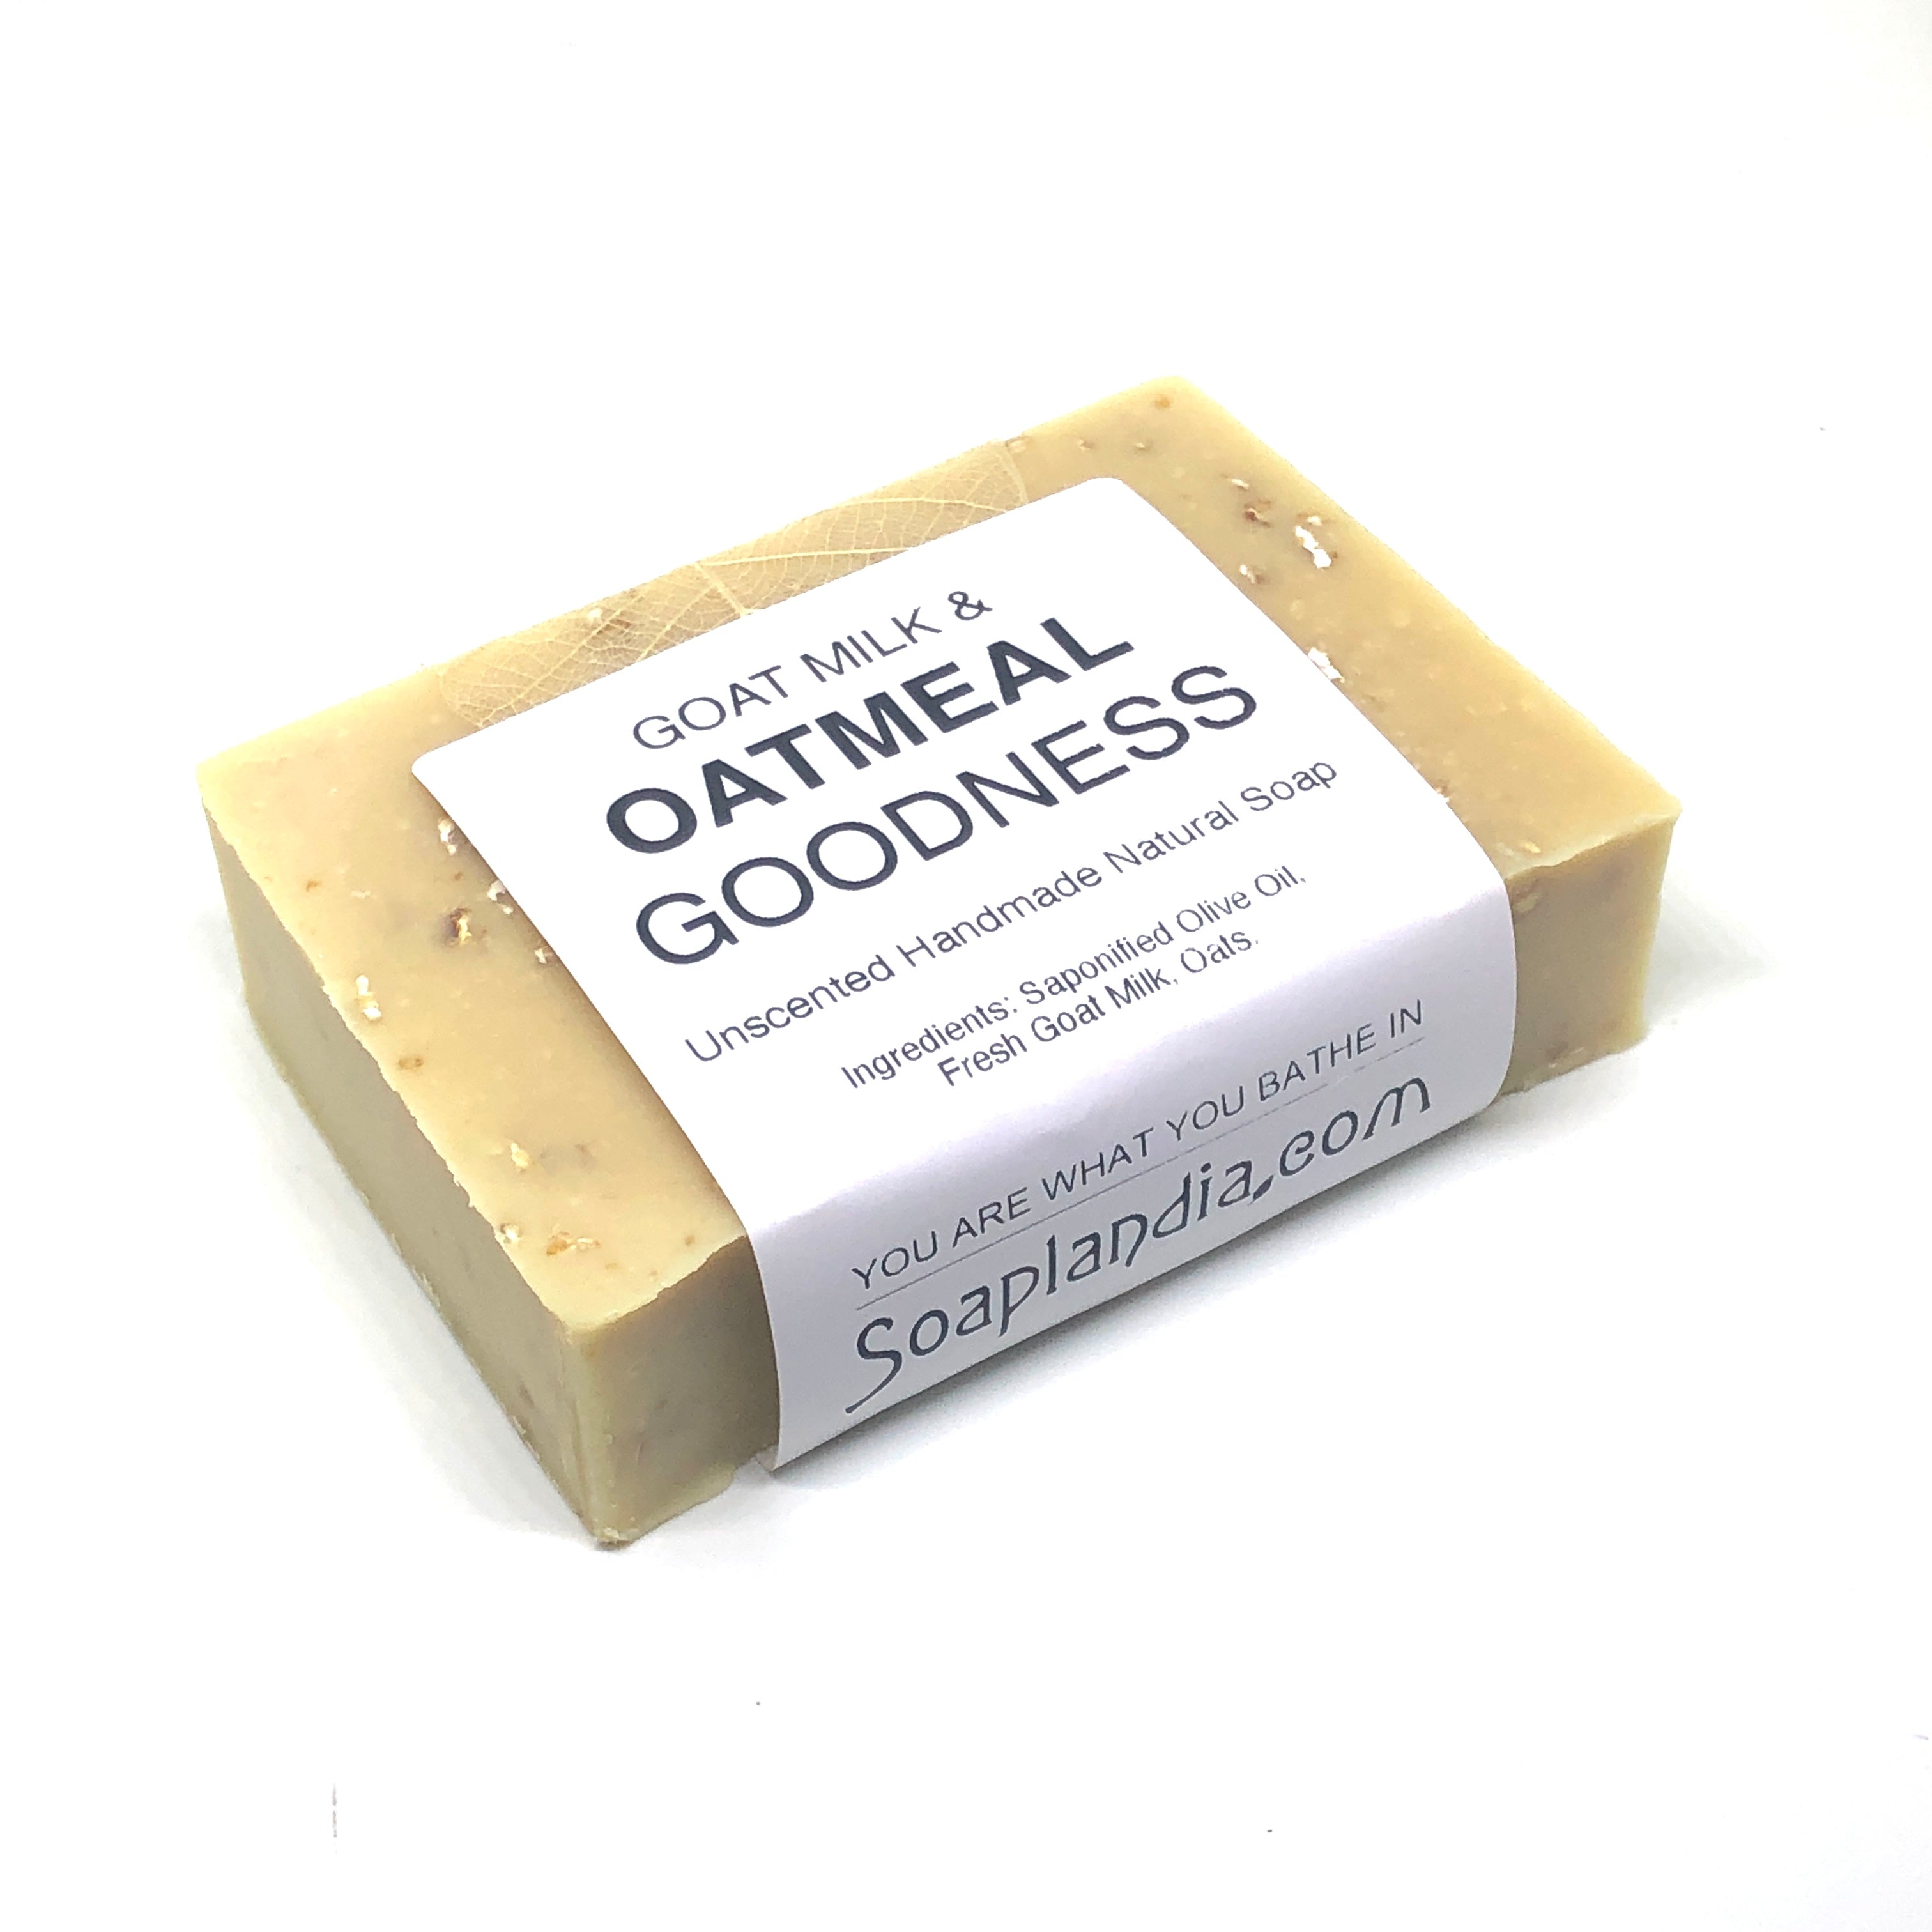 Oatmeal soap - unscented